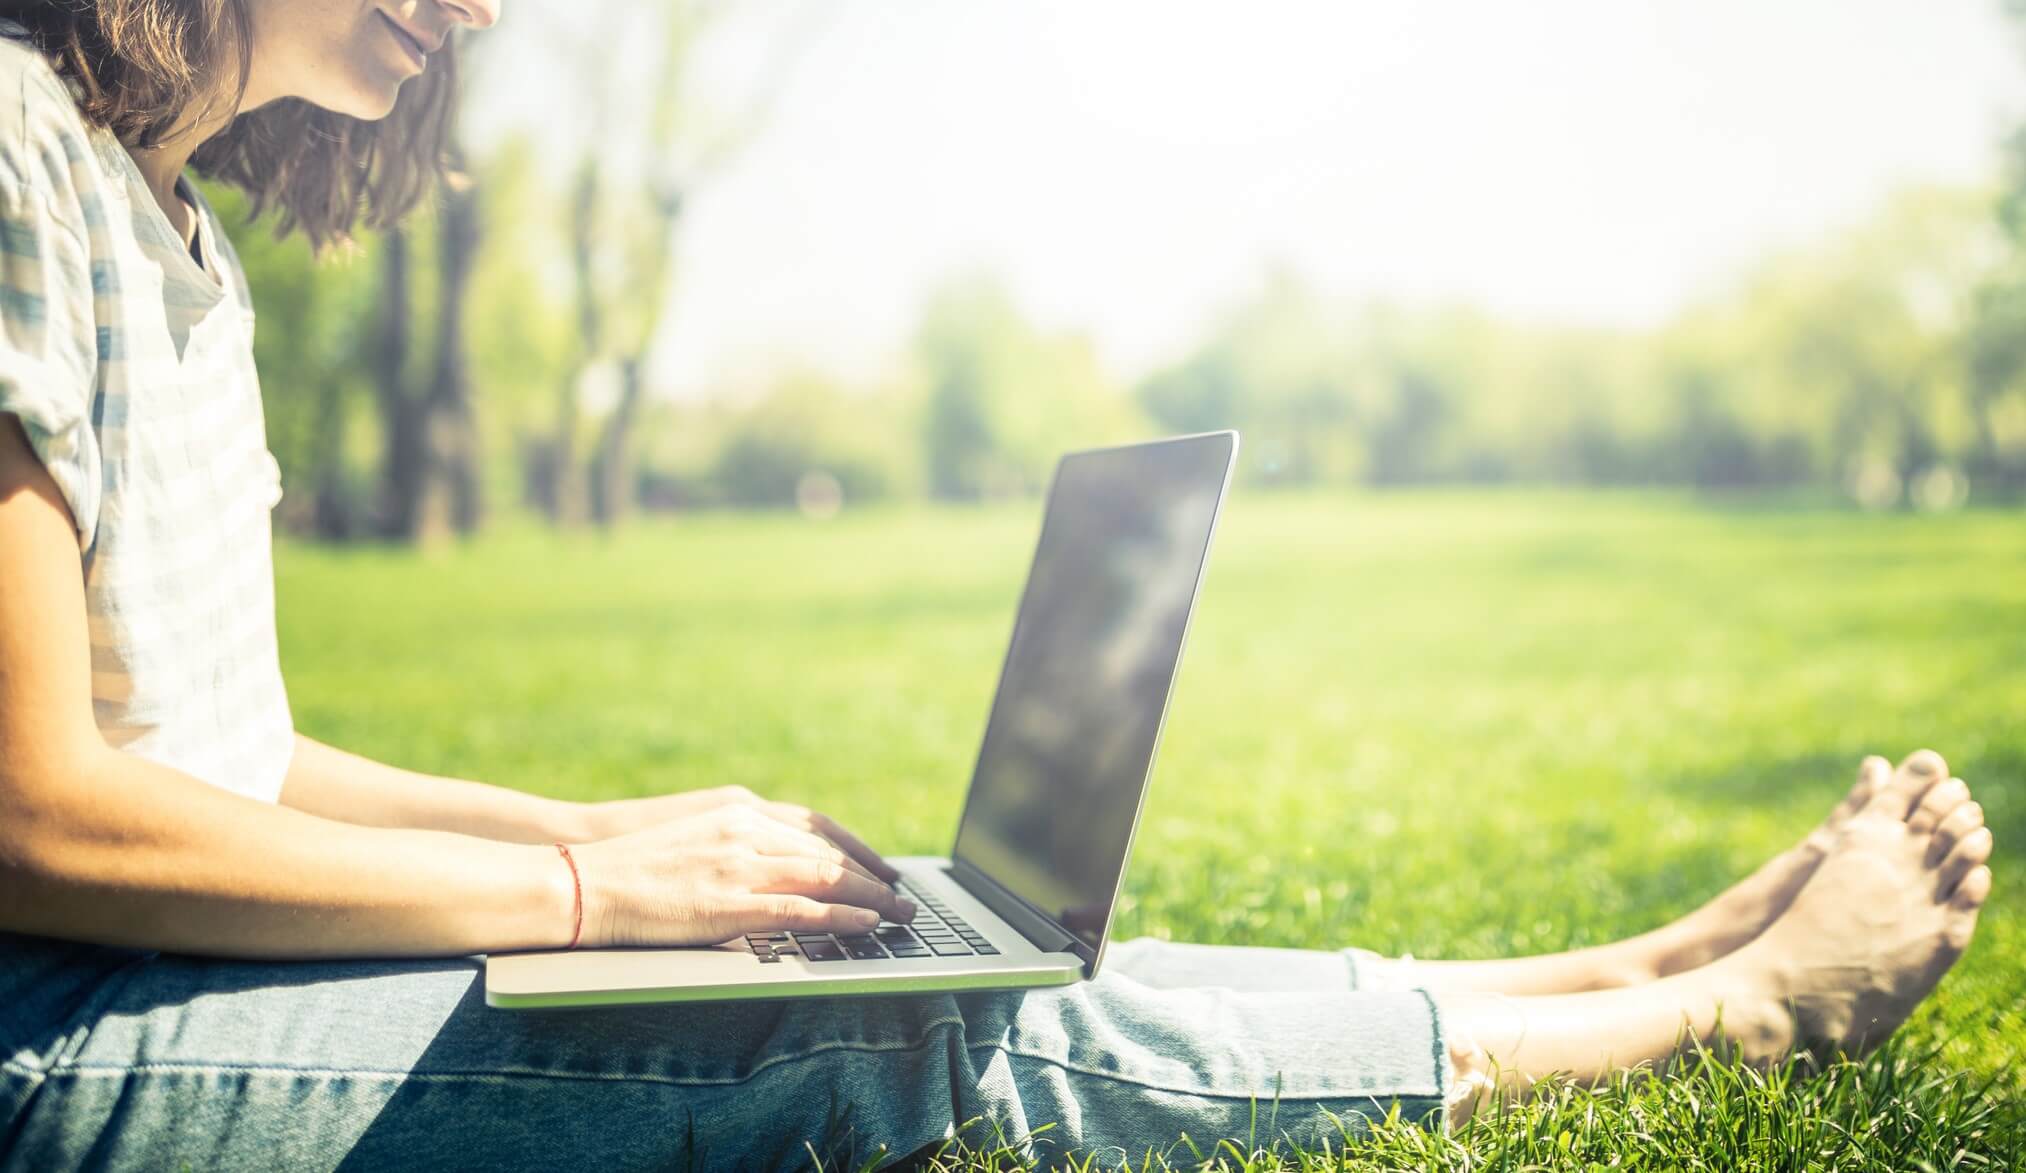 A woman using a laptop in a park